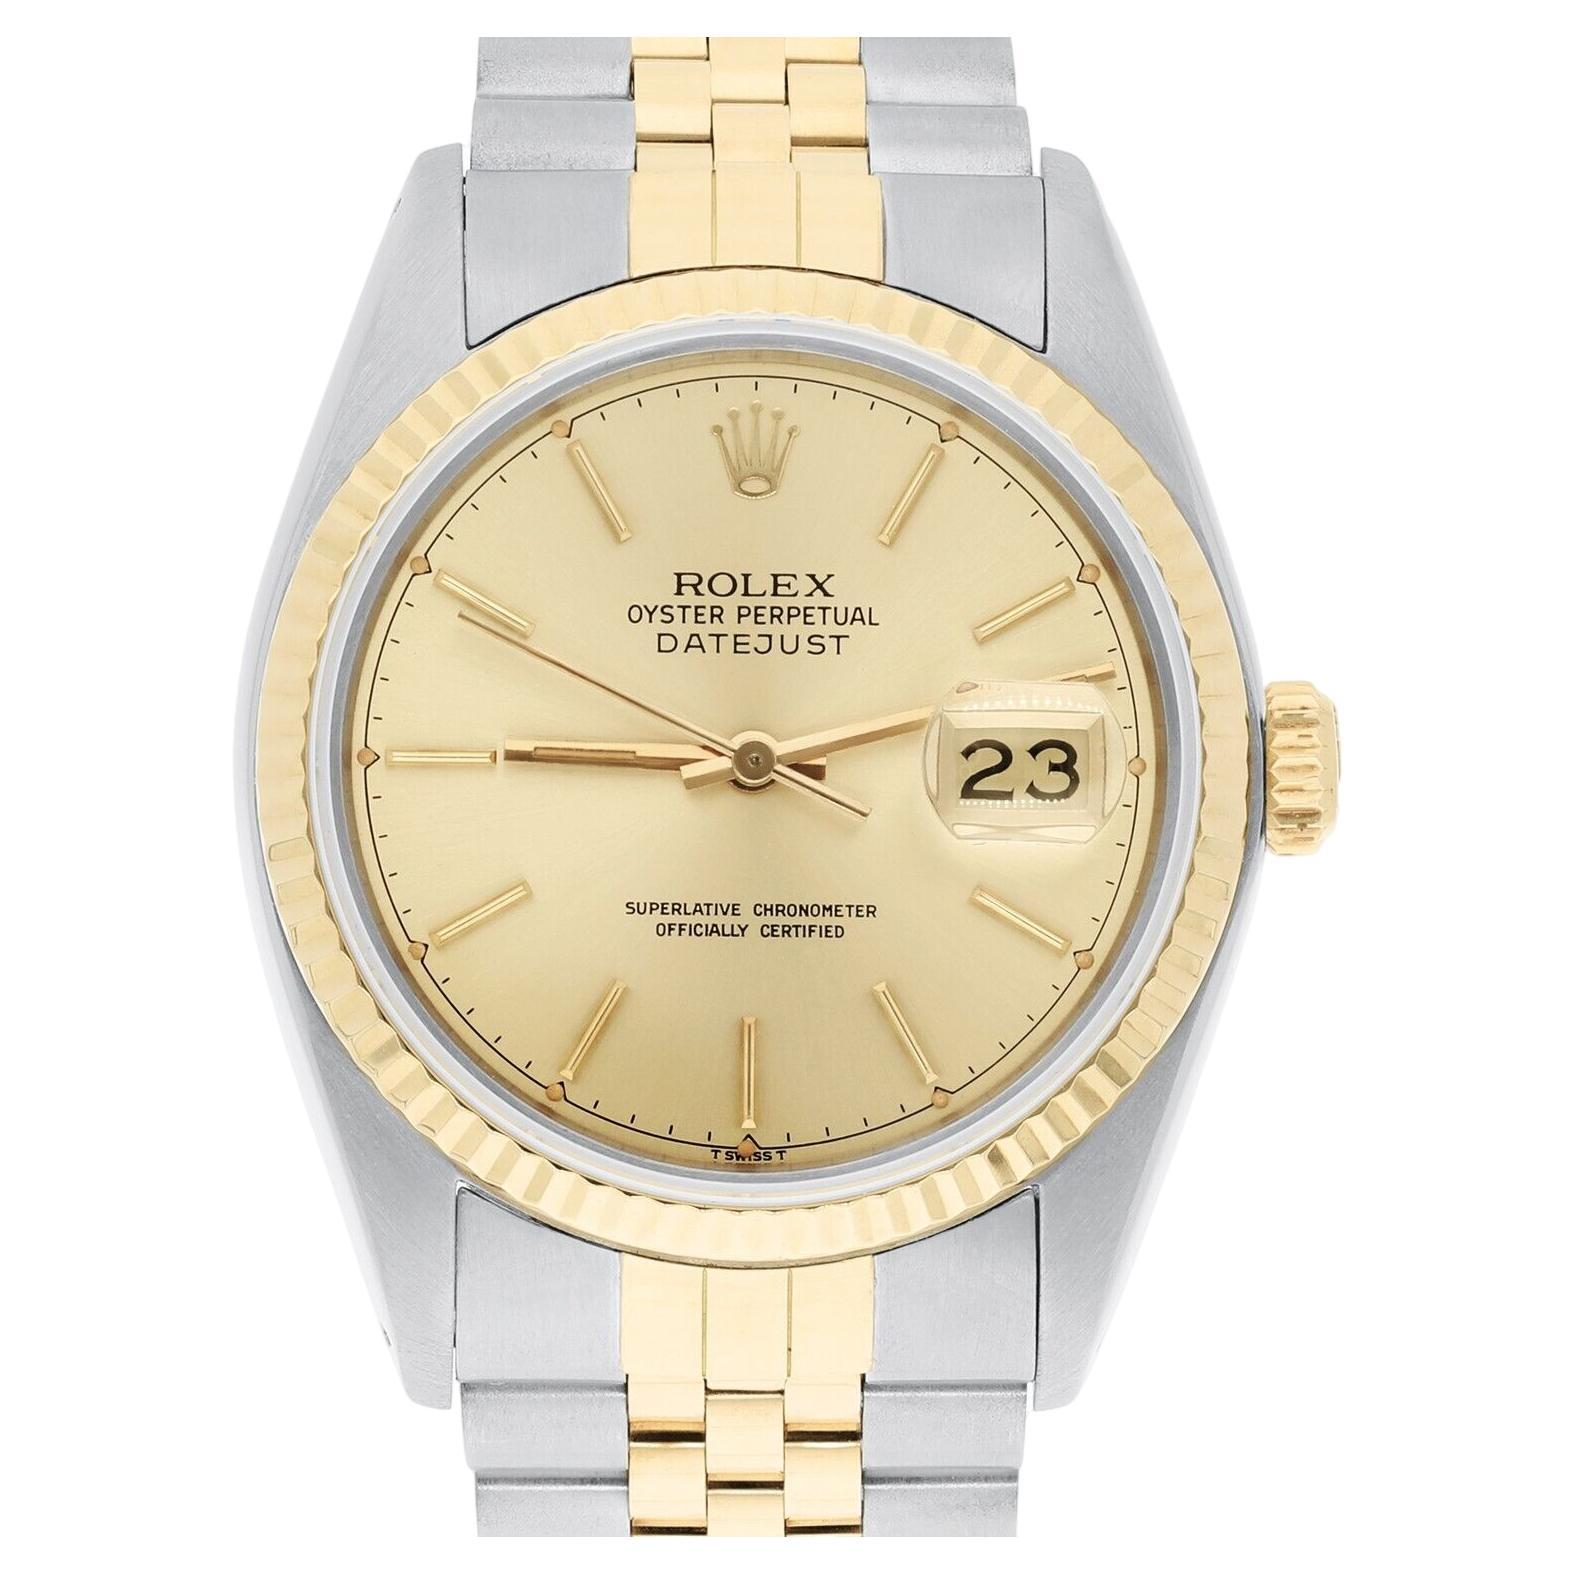 Rolex Datejust 36mm Two Tone Champagne Dial Jubilee Band 16013 Circa 1979 B/P For Sale